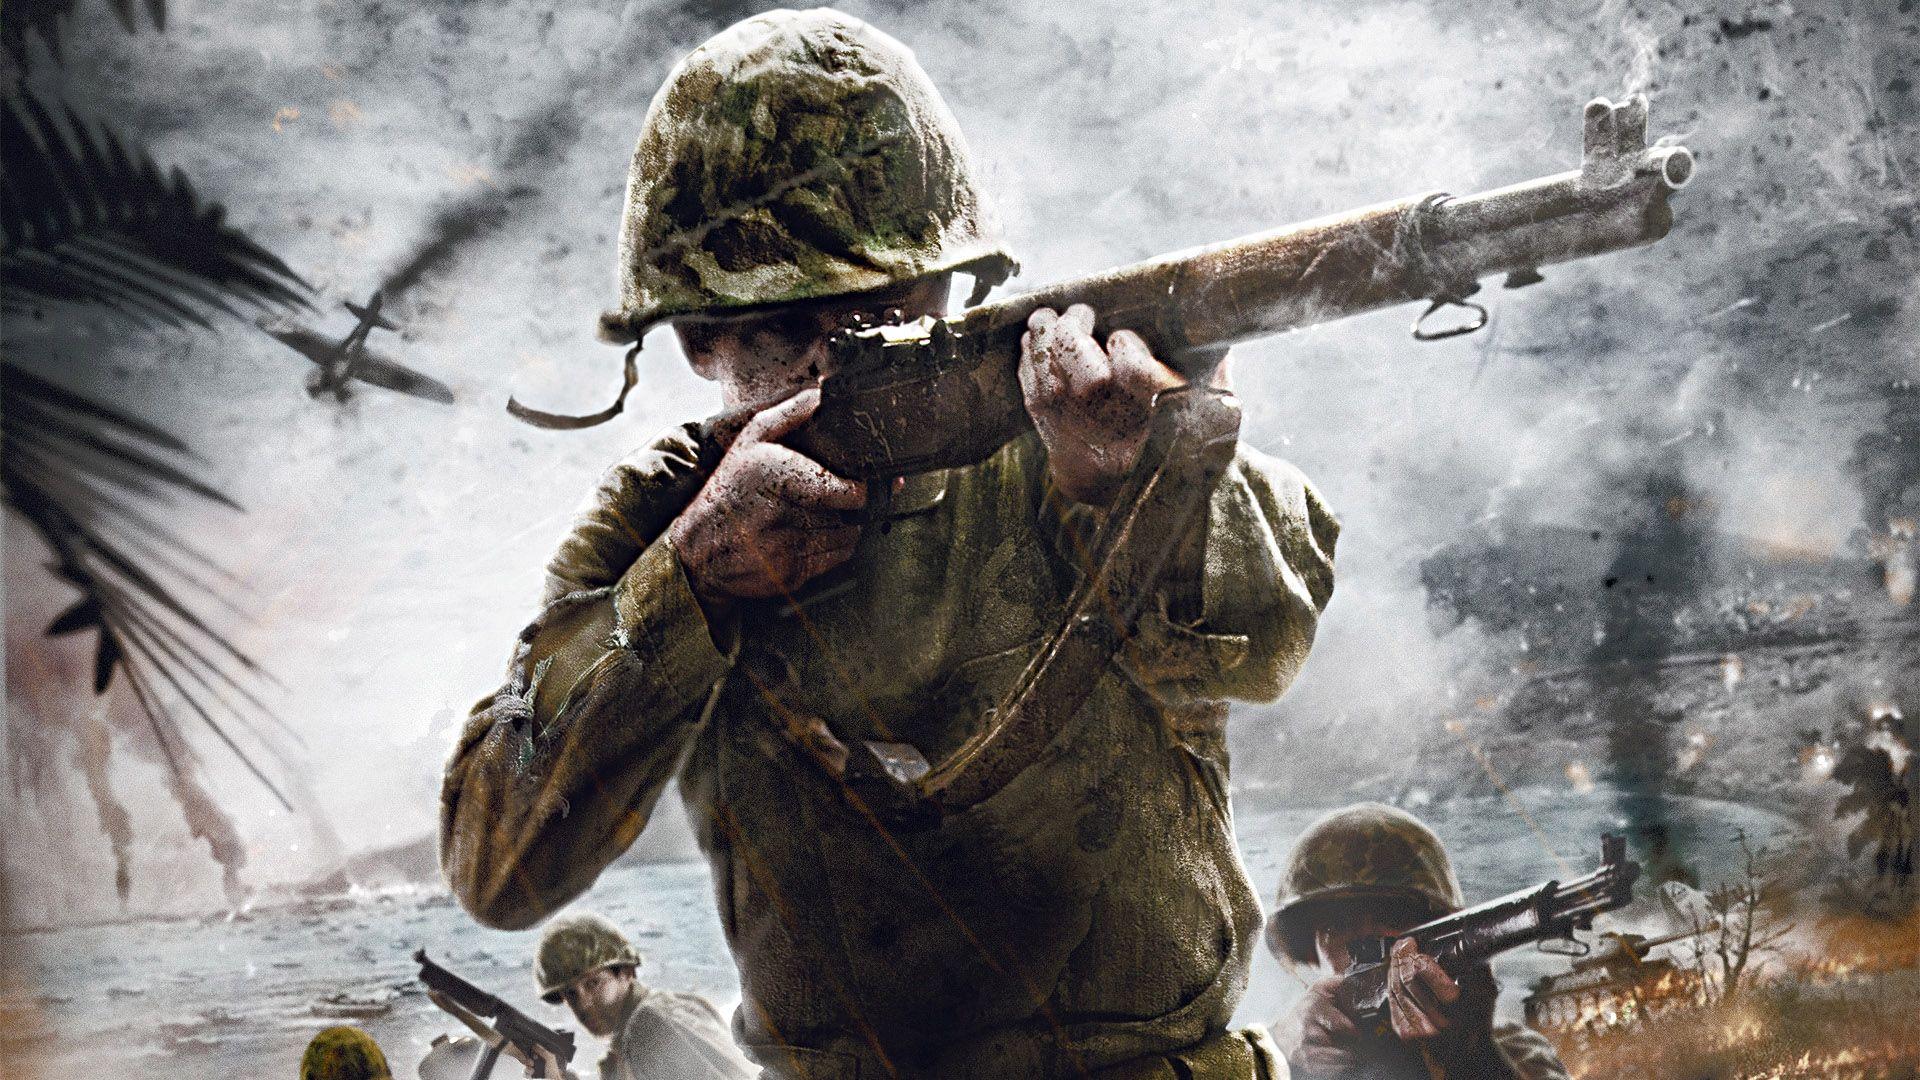 Activision says next Call of Duty will go back to the series roots